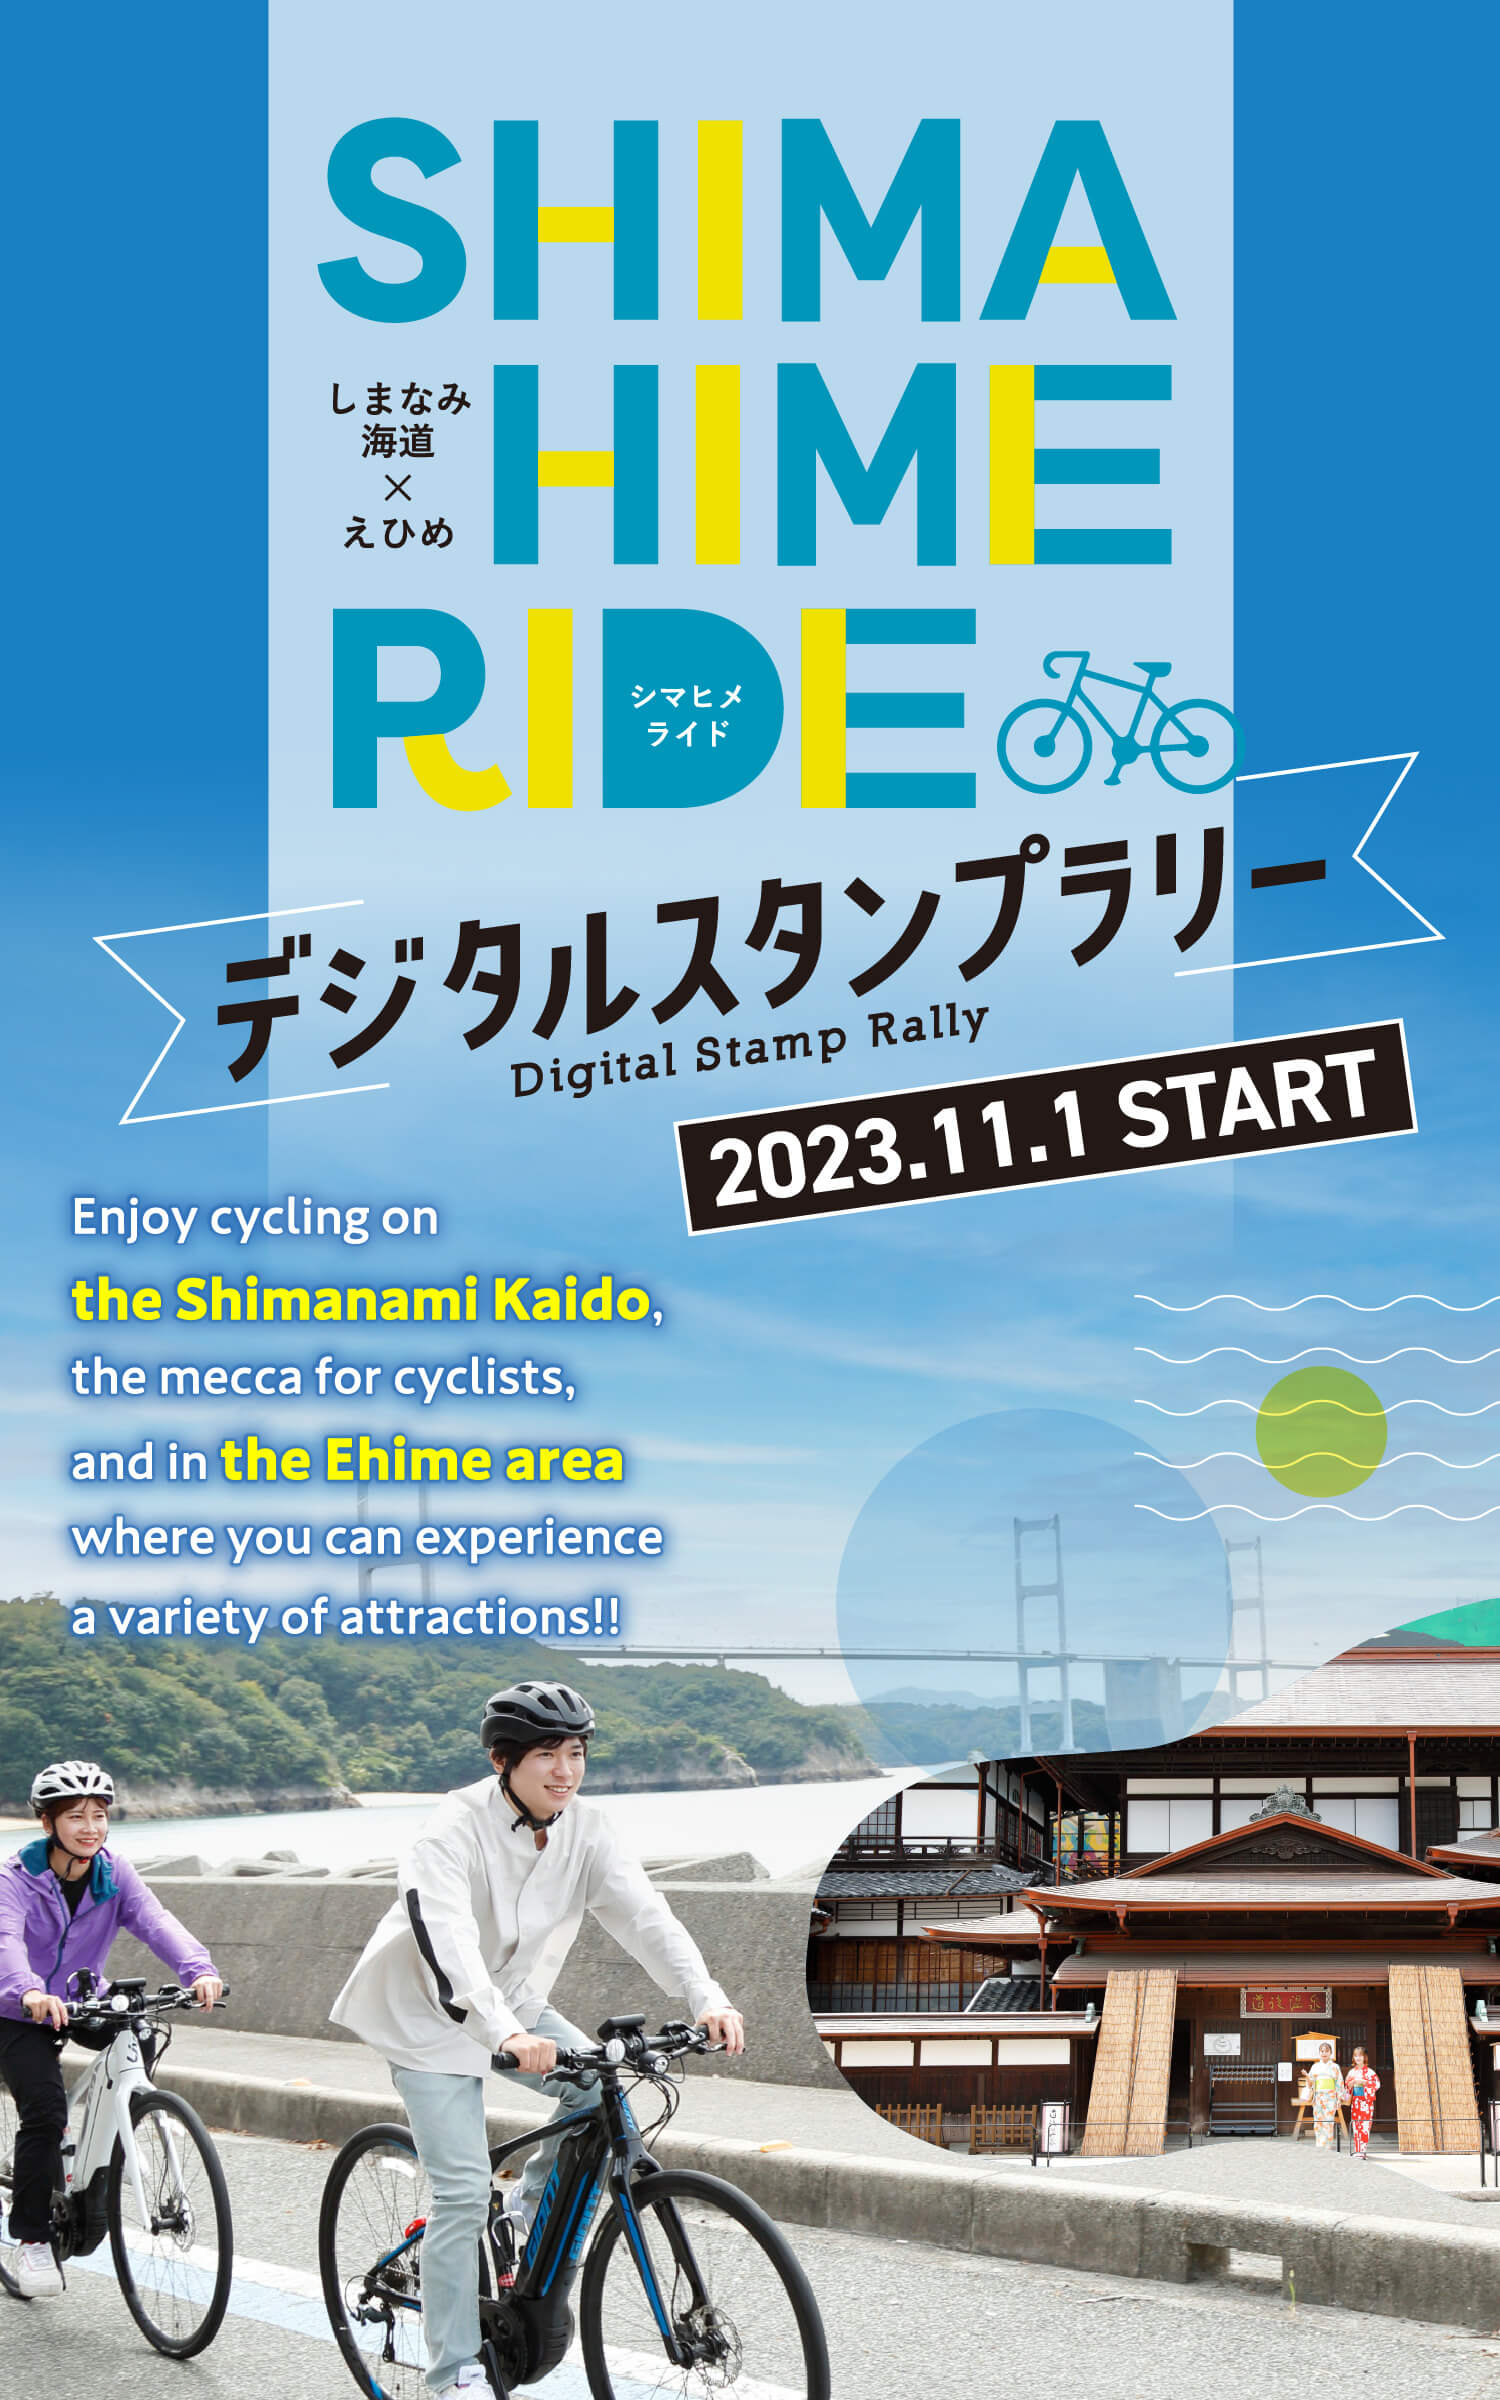 SHIMAHIMERIDE the Shimanami Kaido × the Ehime area Digital Stamp Rally 2023.11.1 START Enjoy cycling on the Shimanami Kaido,the mecca for cyclists,and in the Ehime area where you can experience a variety of attractions!!